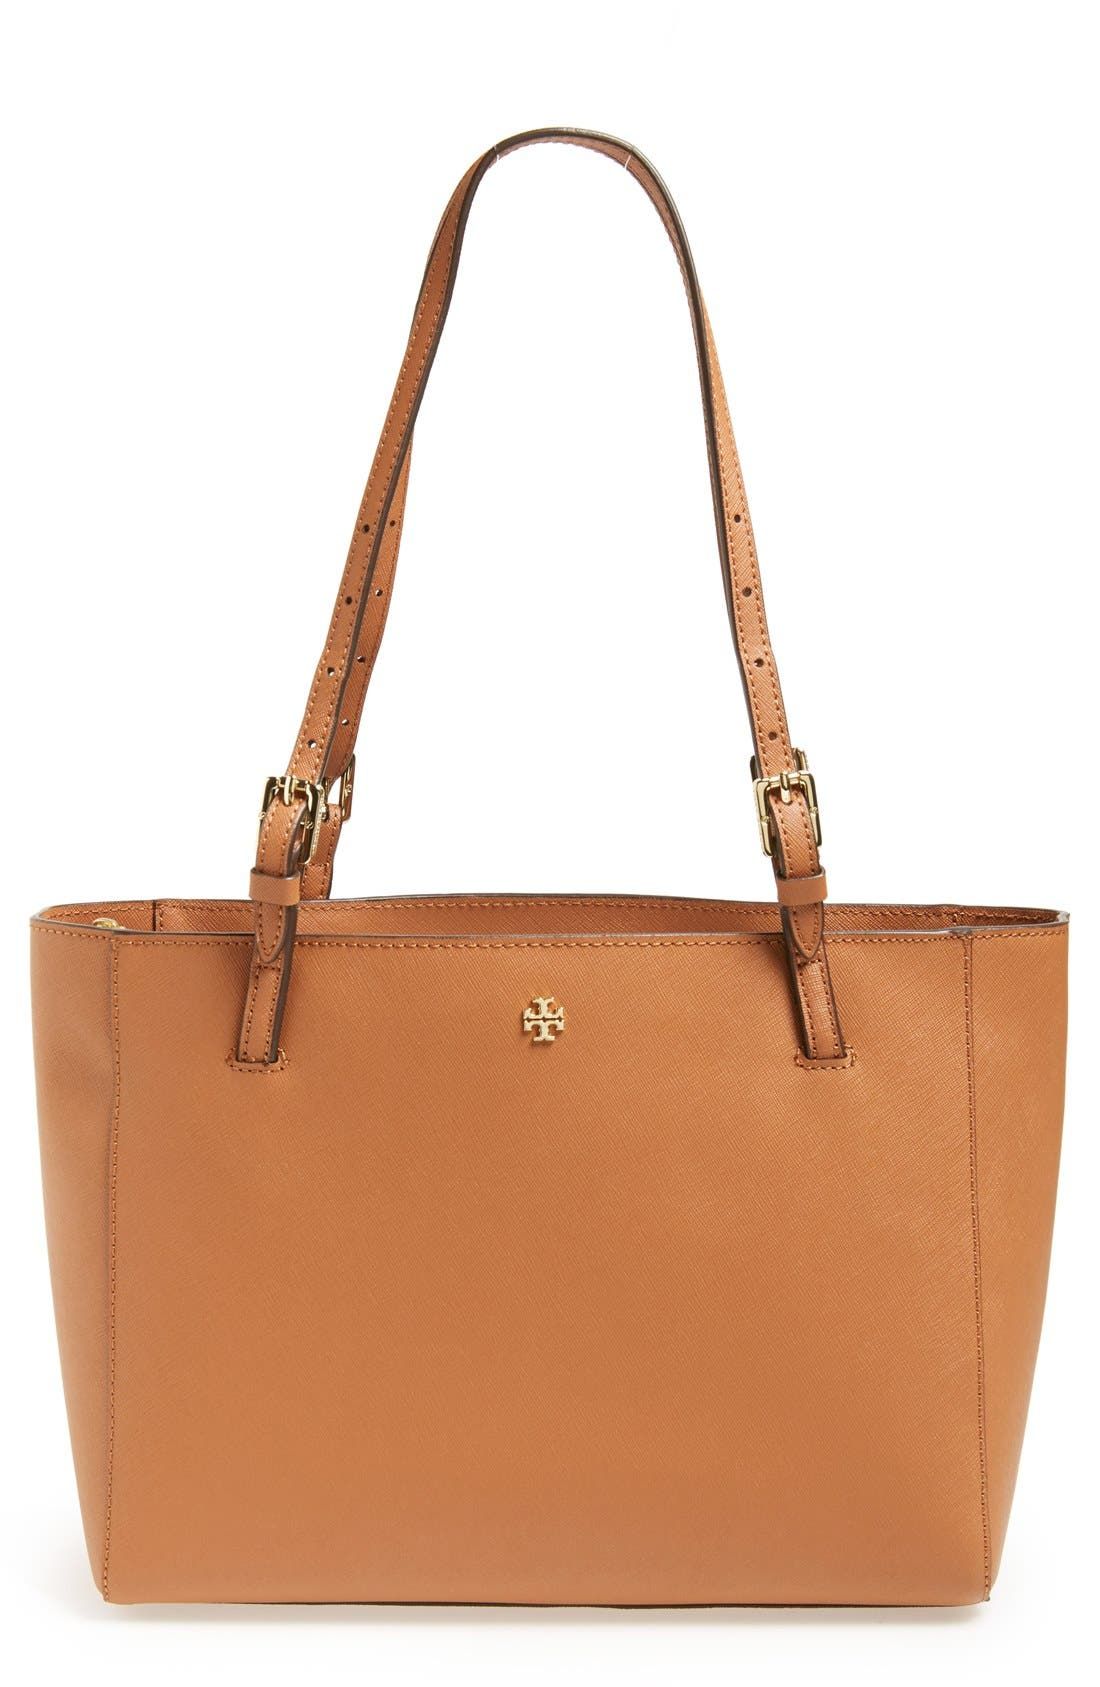 'Small York' Saffiano Leather Buckle Tote | Nordstrom